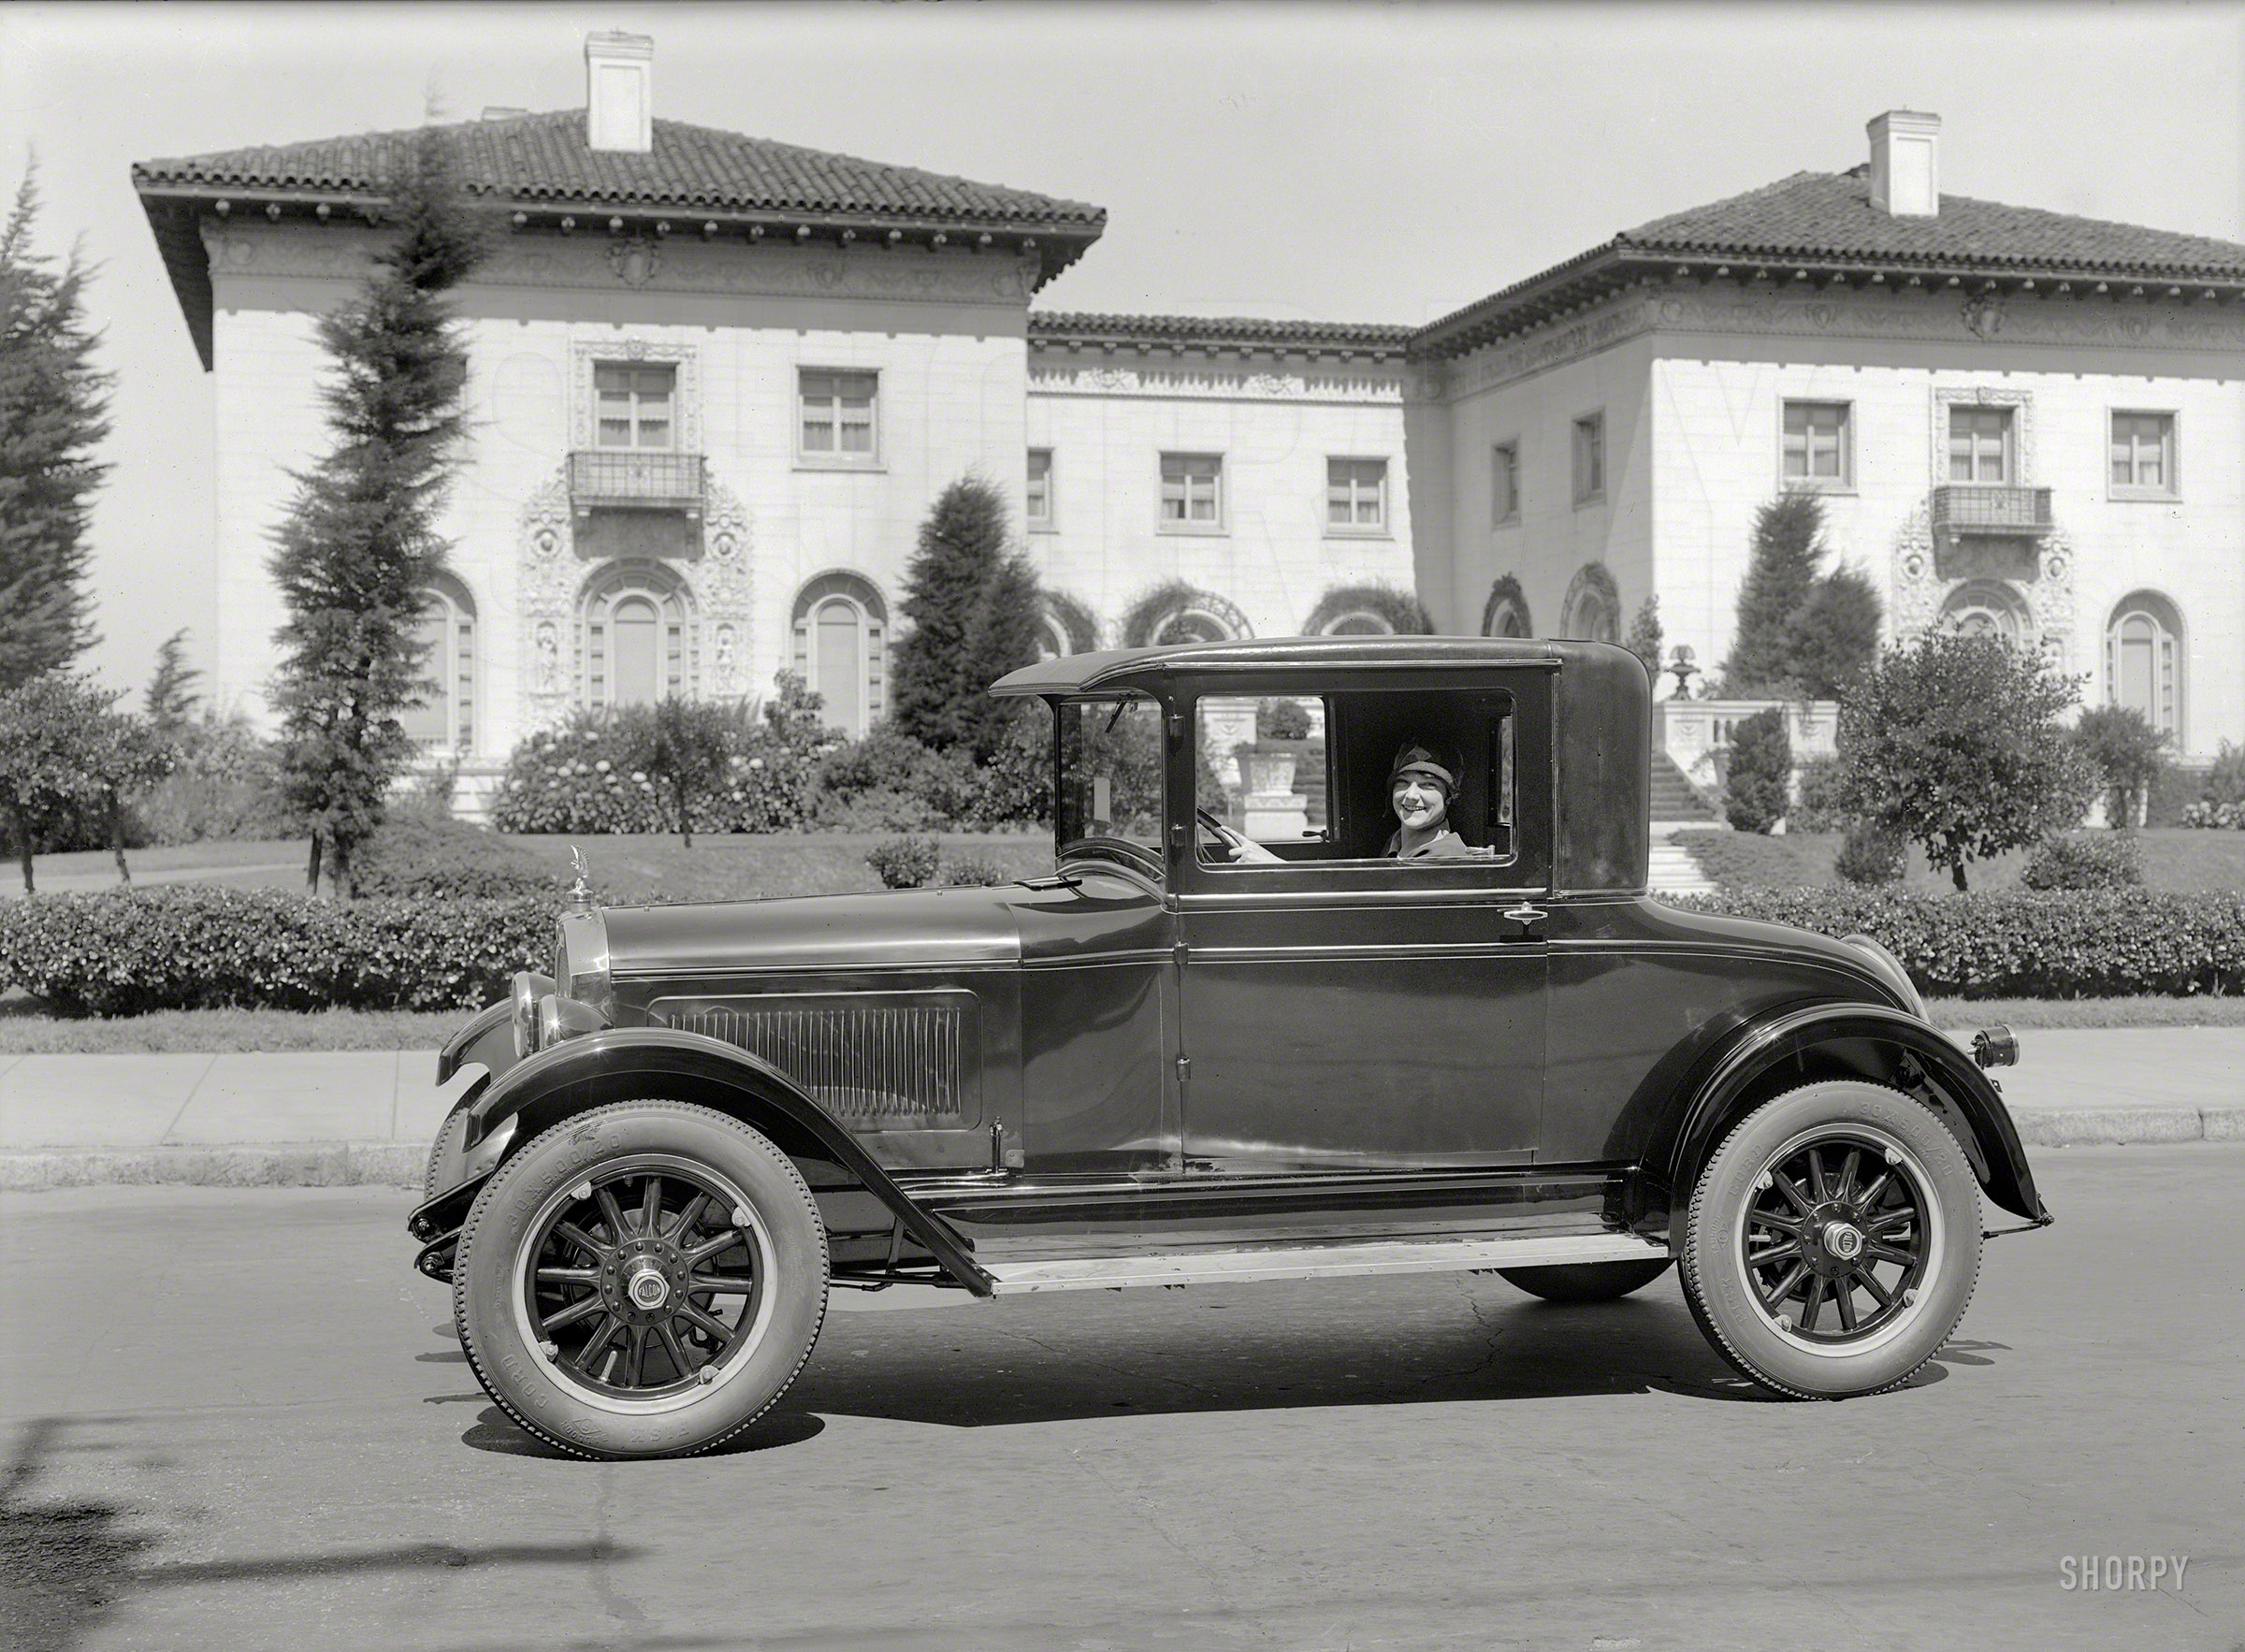 San Francisco circa 1927. "Falcon-Knight coupe." Latest hatchling in the Shorpy Aviary of Automotive Albatrosses. Glass negative by Chris Helin. View full size.